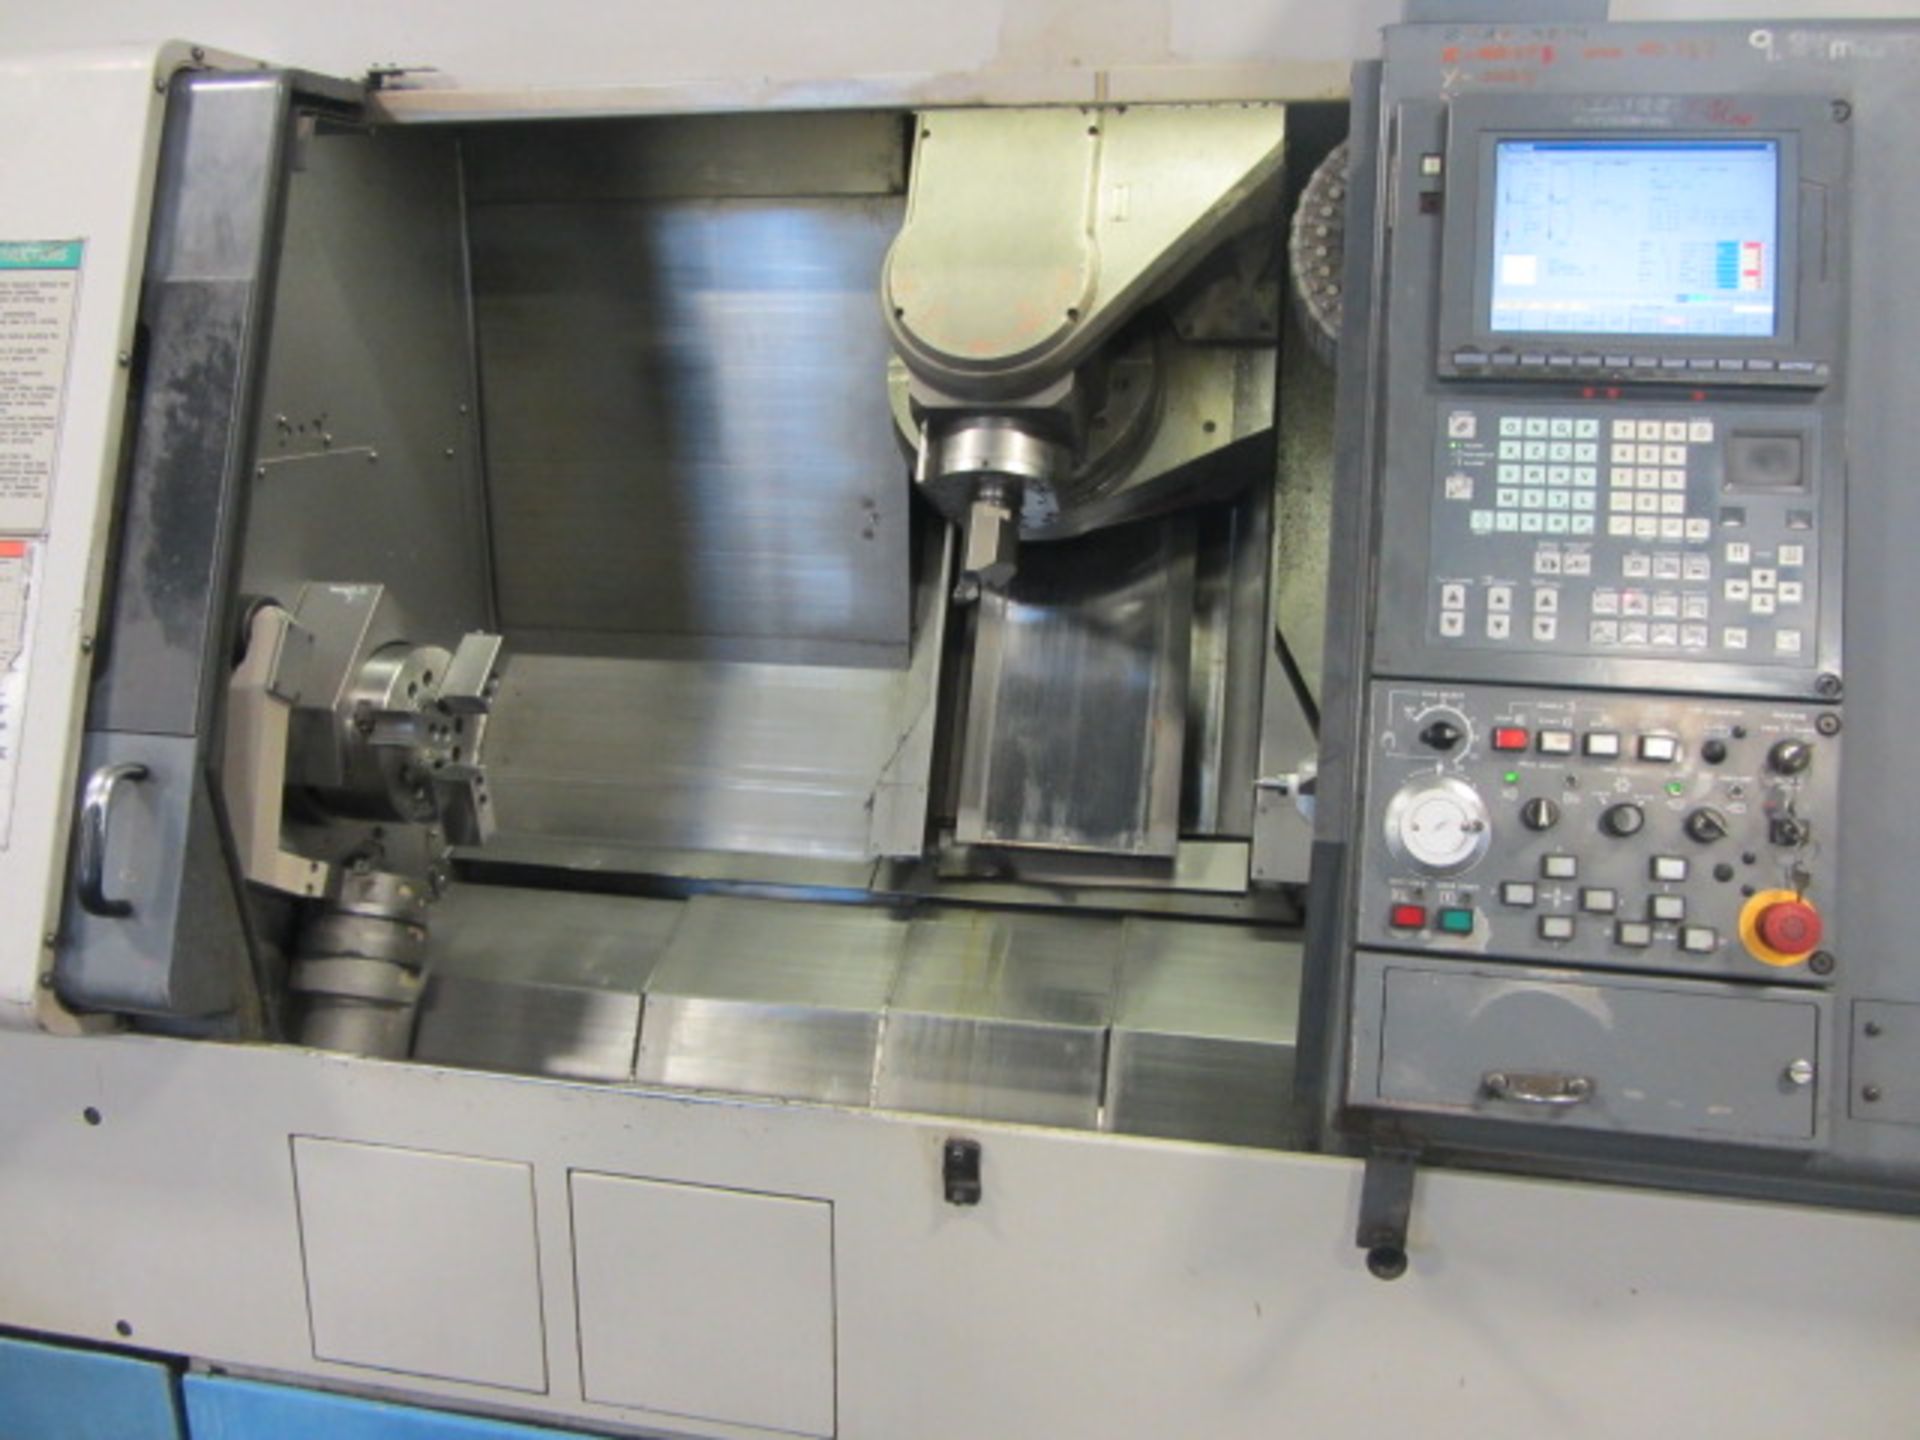 Mazak Integrex 200SY CNC Turning Center with Sub-Spindle, Milling & Y-Axis, 8'' Chuck on Main - Image 6 of 9